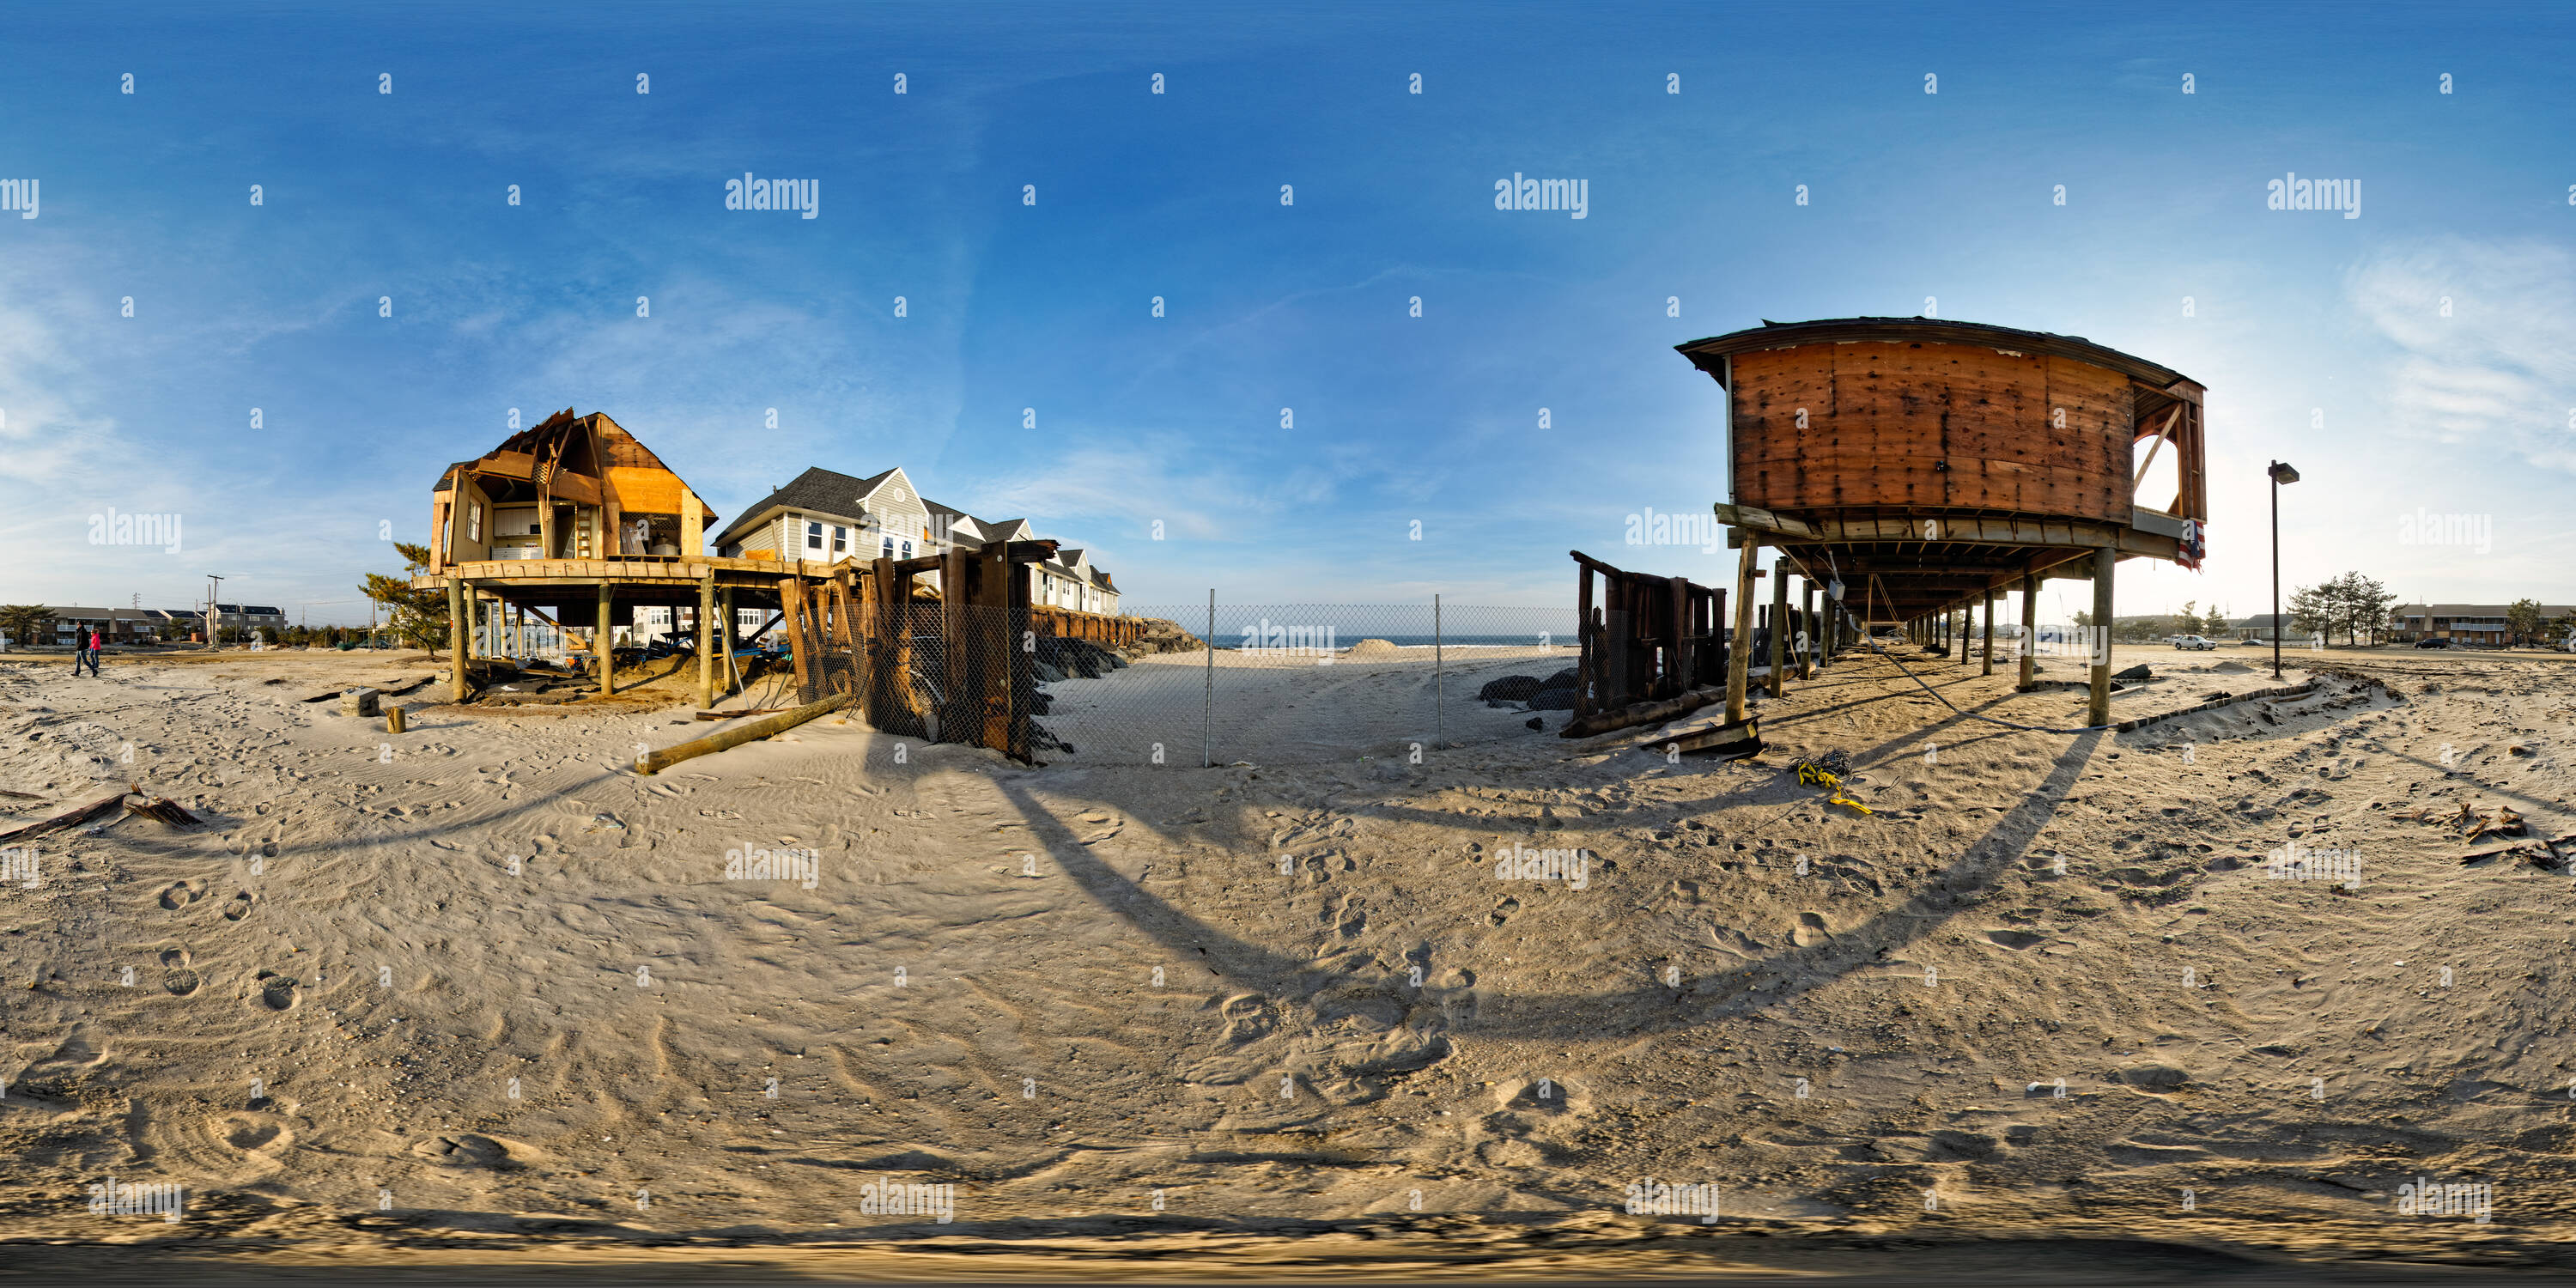 360 degree panoramic view of Beach Club, Sea Bright, New Jersey - After Super Storm Sandy 2012